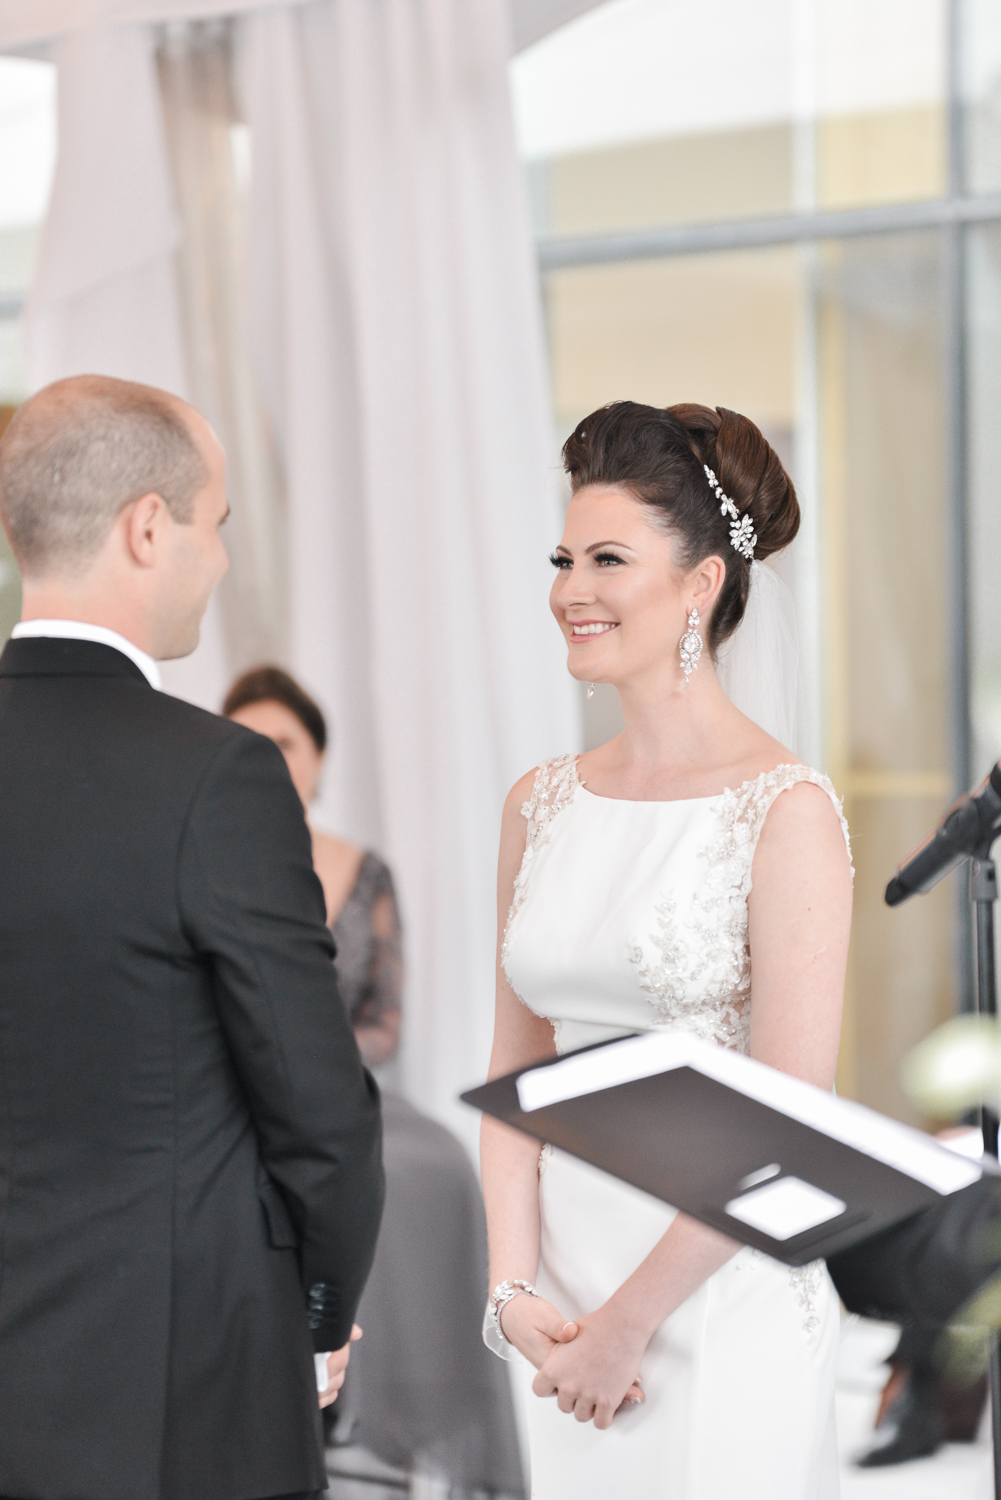 Saying your vows at Malaparte wedding